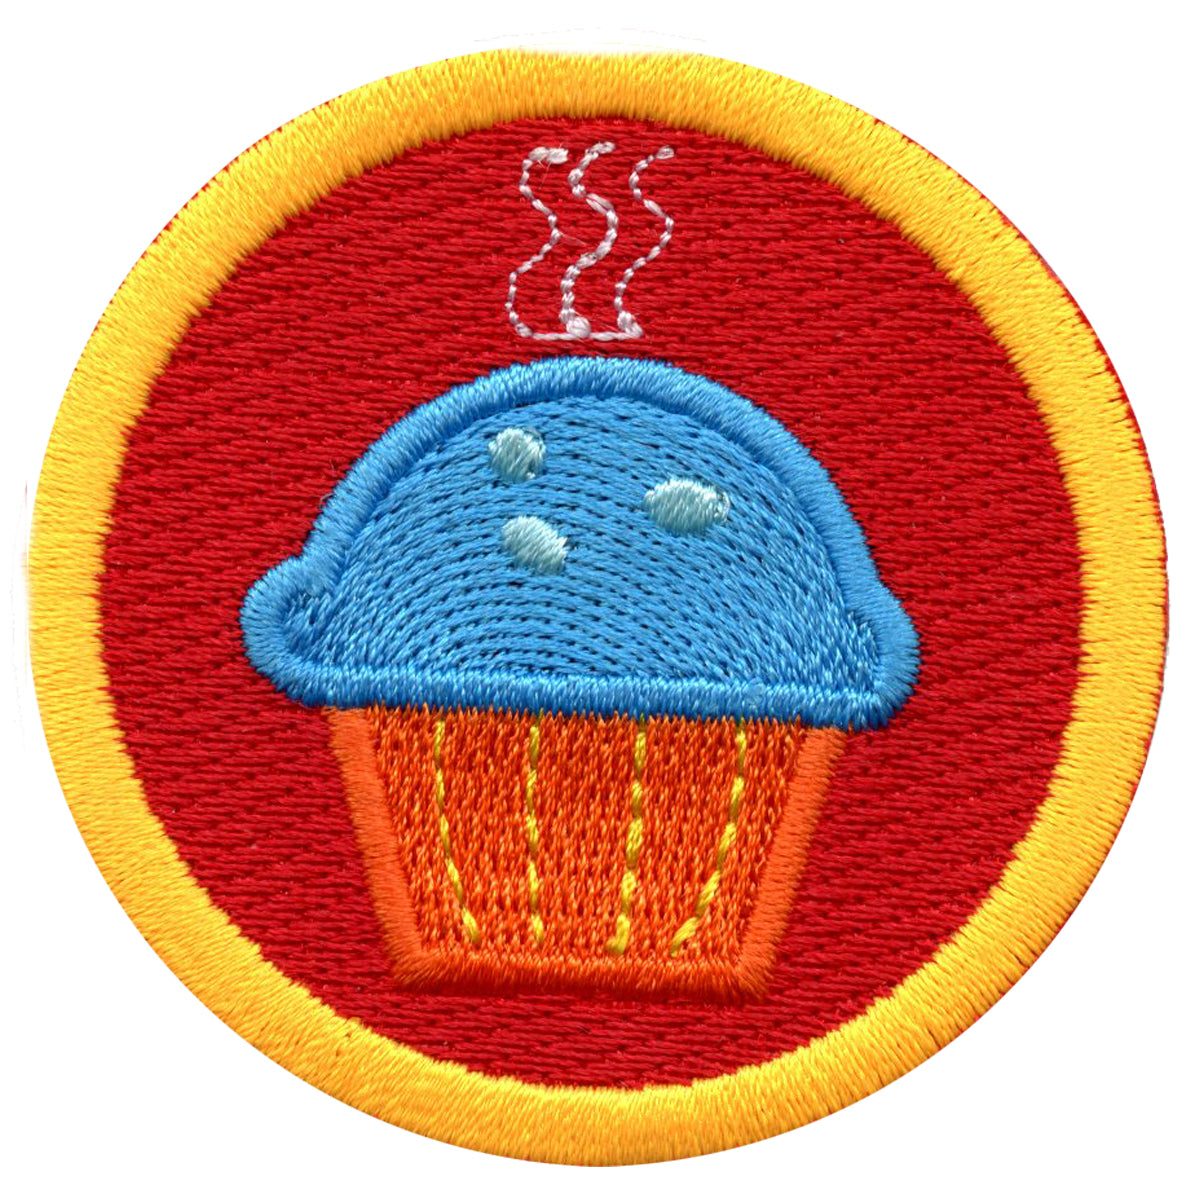 Baking Scout Merit Badge Embroidered Iron on Patch 